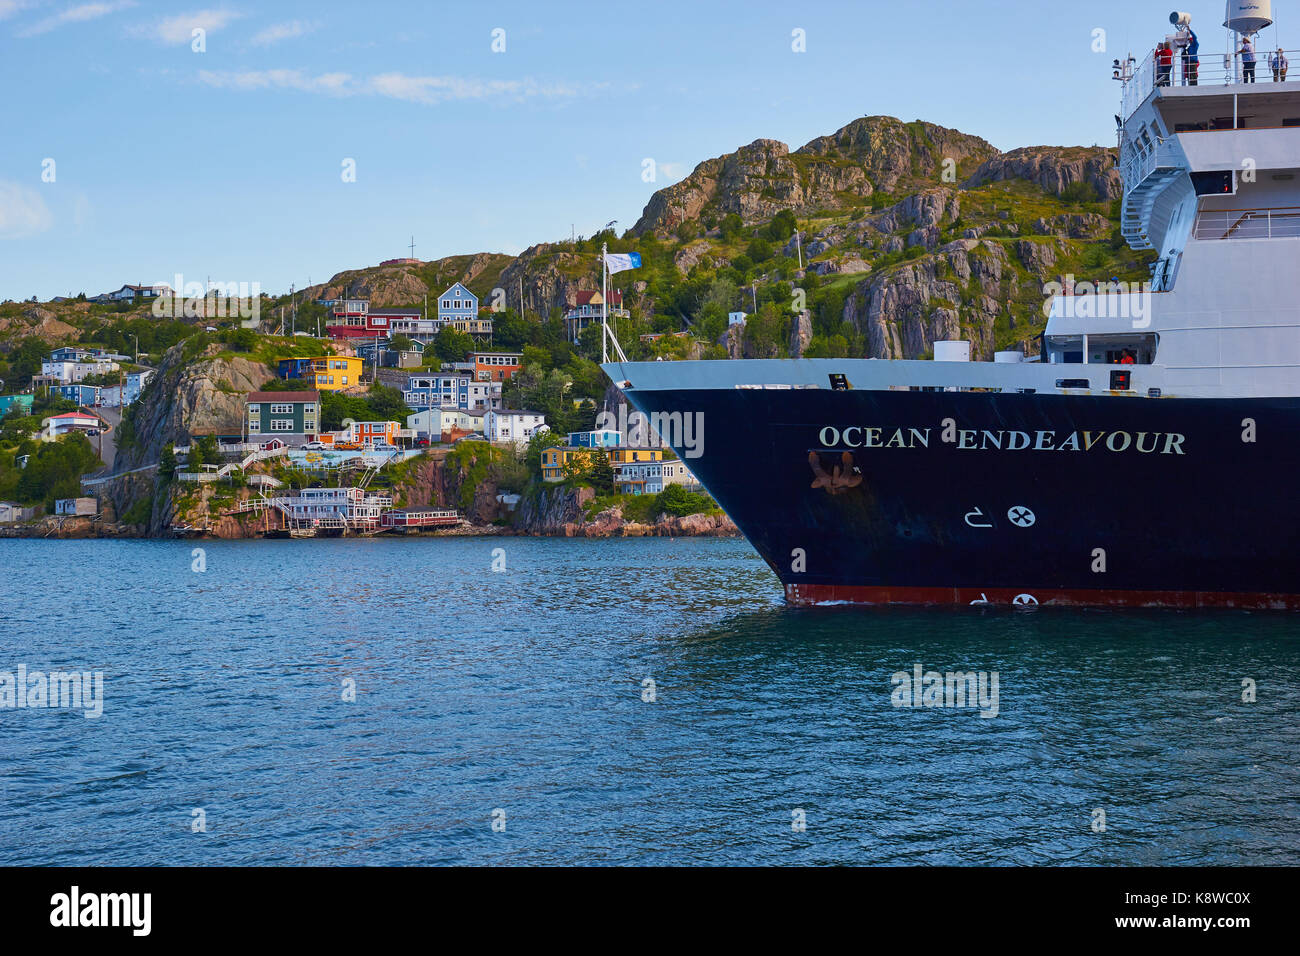 Ocean Endeavour cruise ship used for expedition cruising in remote environments passing The Battery neighbourhood, St John's, Newfoundland, Canada Stock Photo